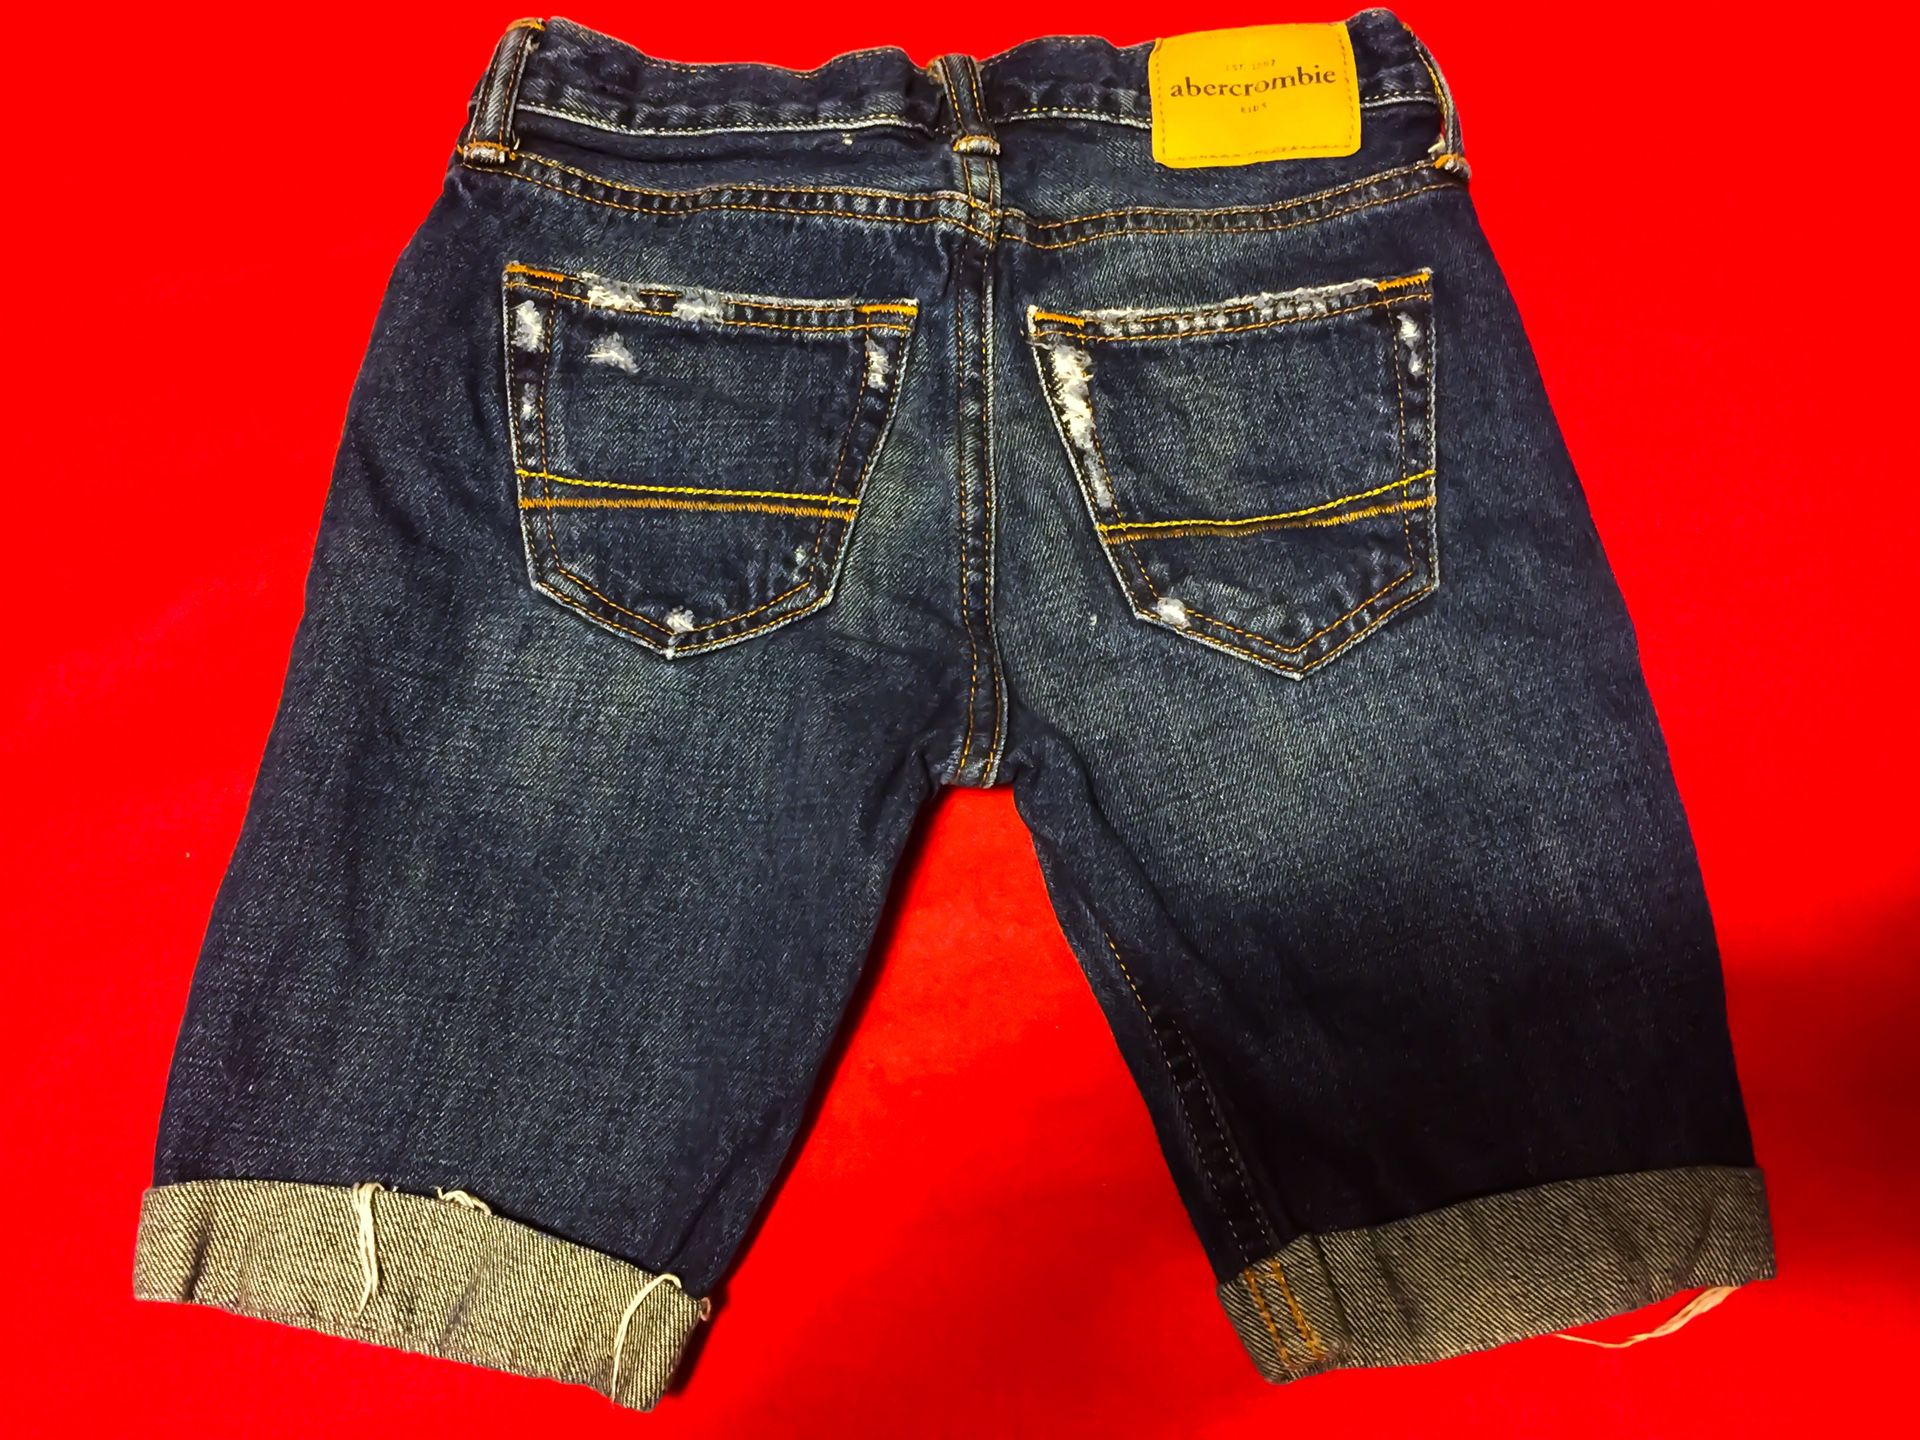 Like New! Abercrombie & Fitch Kids Jeans Size 10